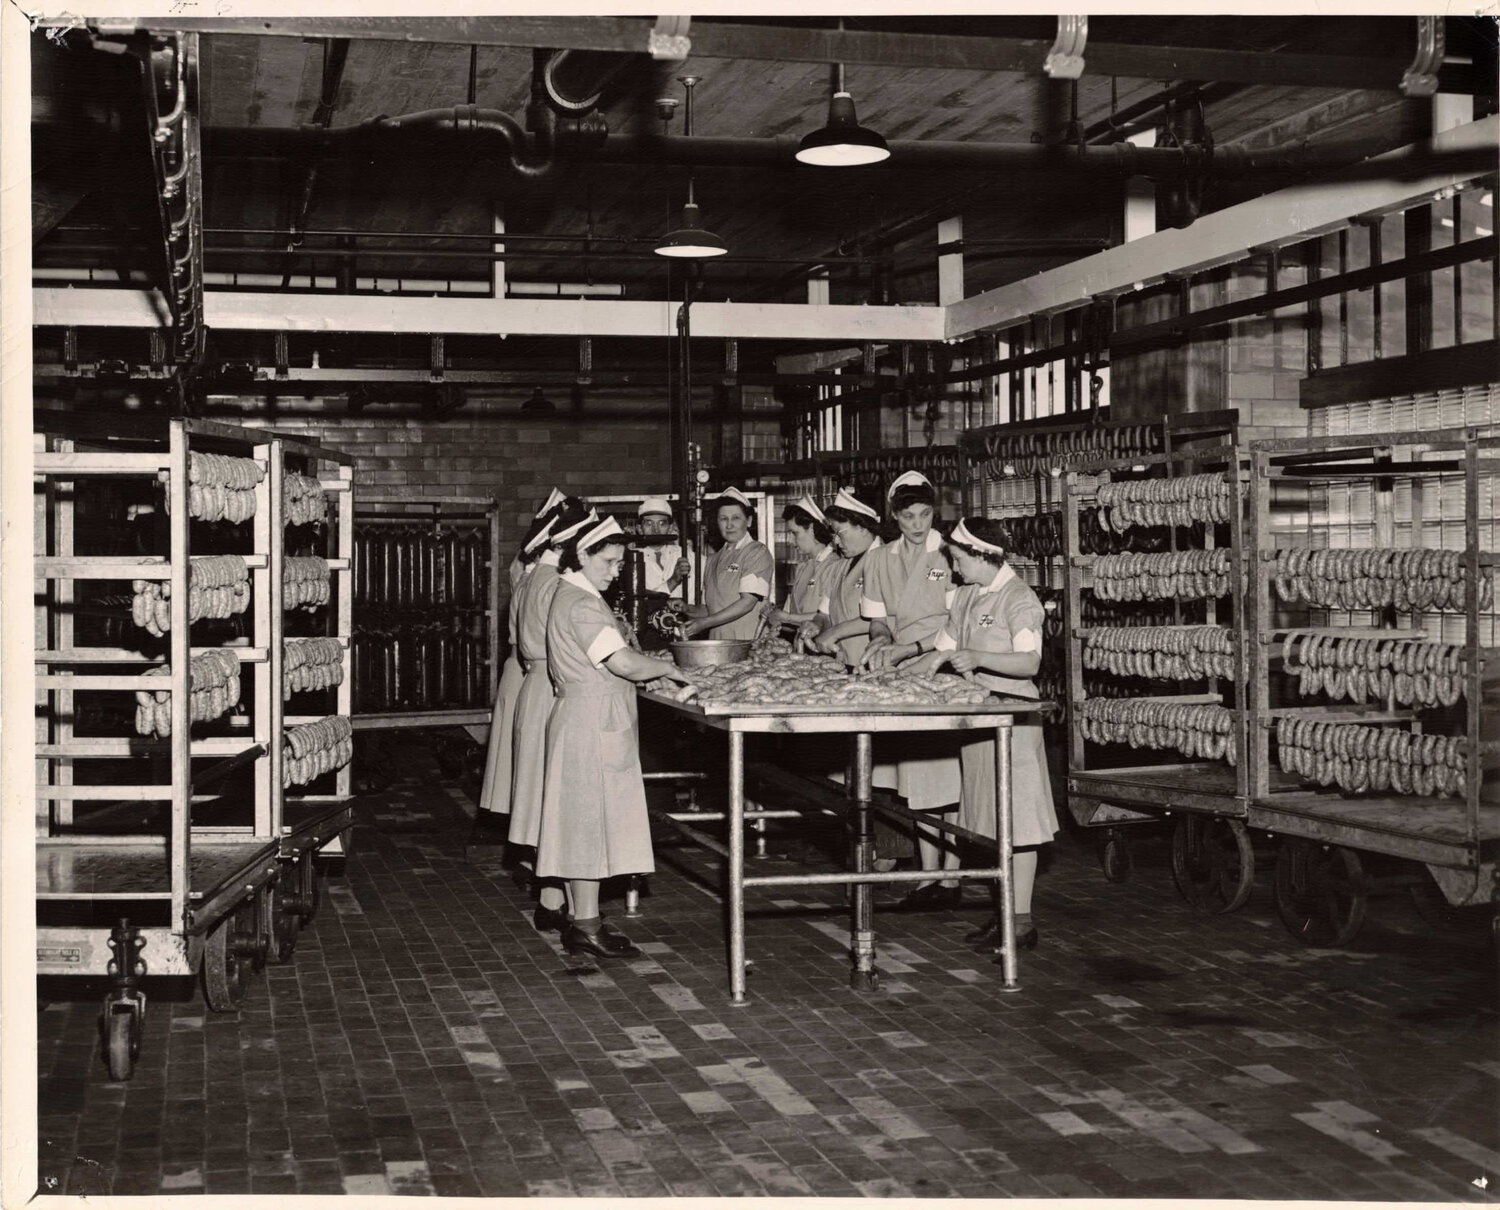 Meatpacking operations, Frye & Company, ca. 1945. Frye Art Museum Archives